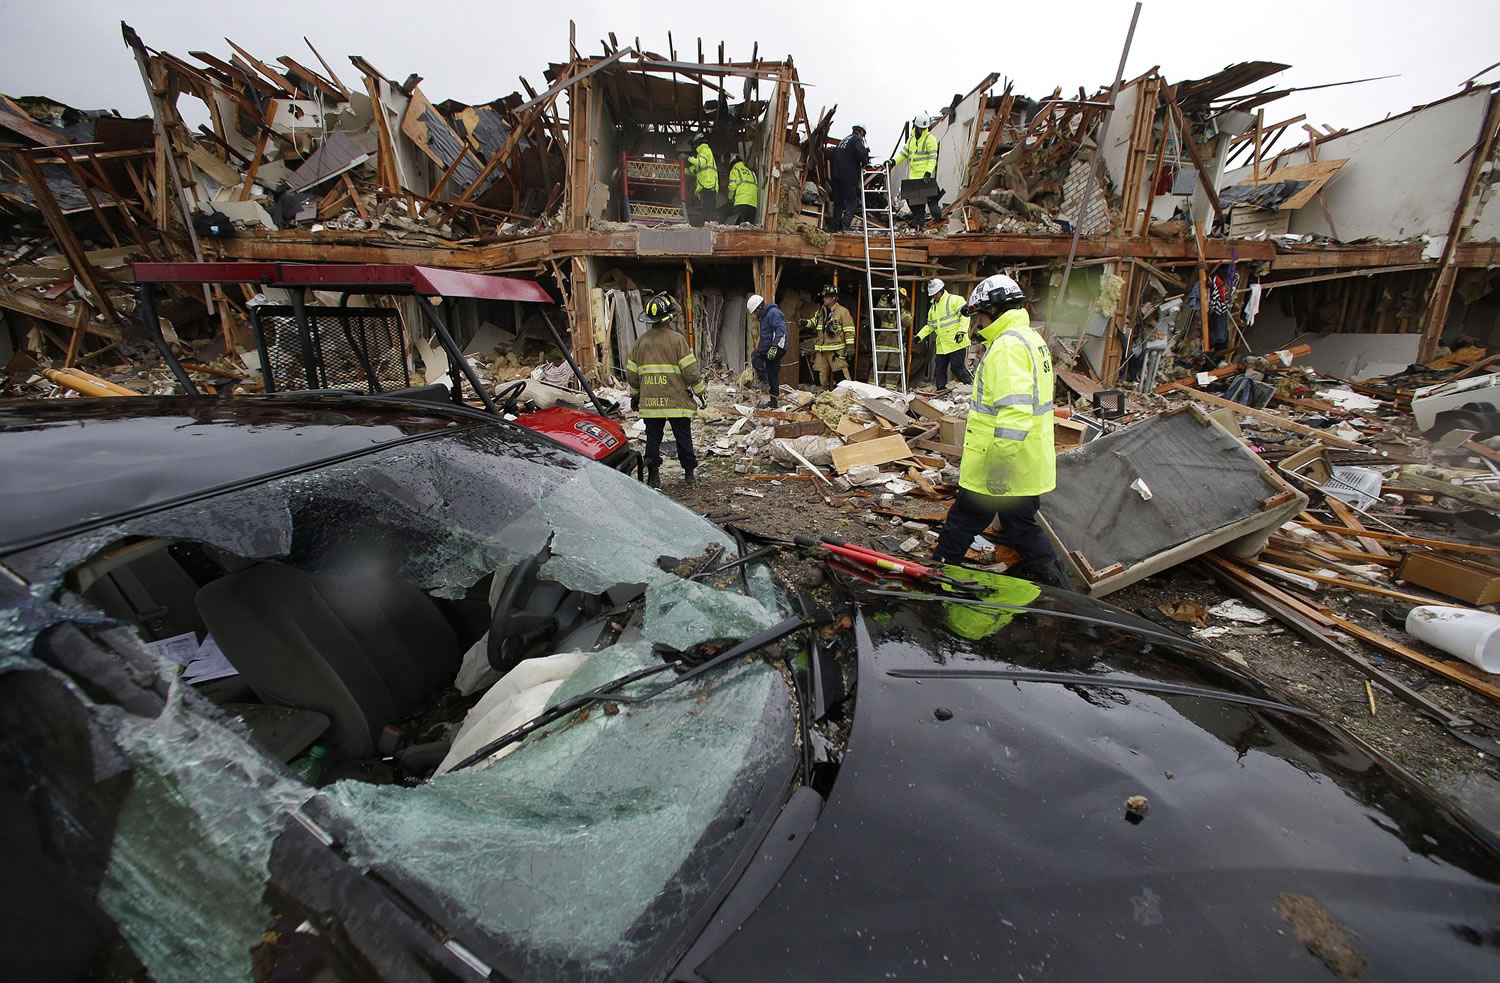 A smashed car sits in front of an apartment complex destroyed by an explosion at a fertilizer plant in West, Texas, as firefighters conduct a search and rescue Thursday. A massive explosion at the West Fertilizer Co.